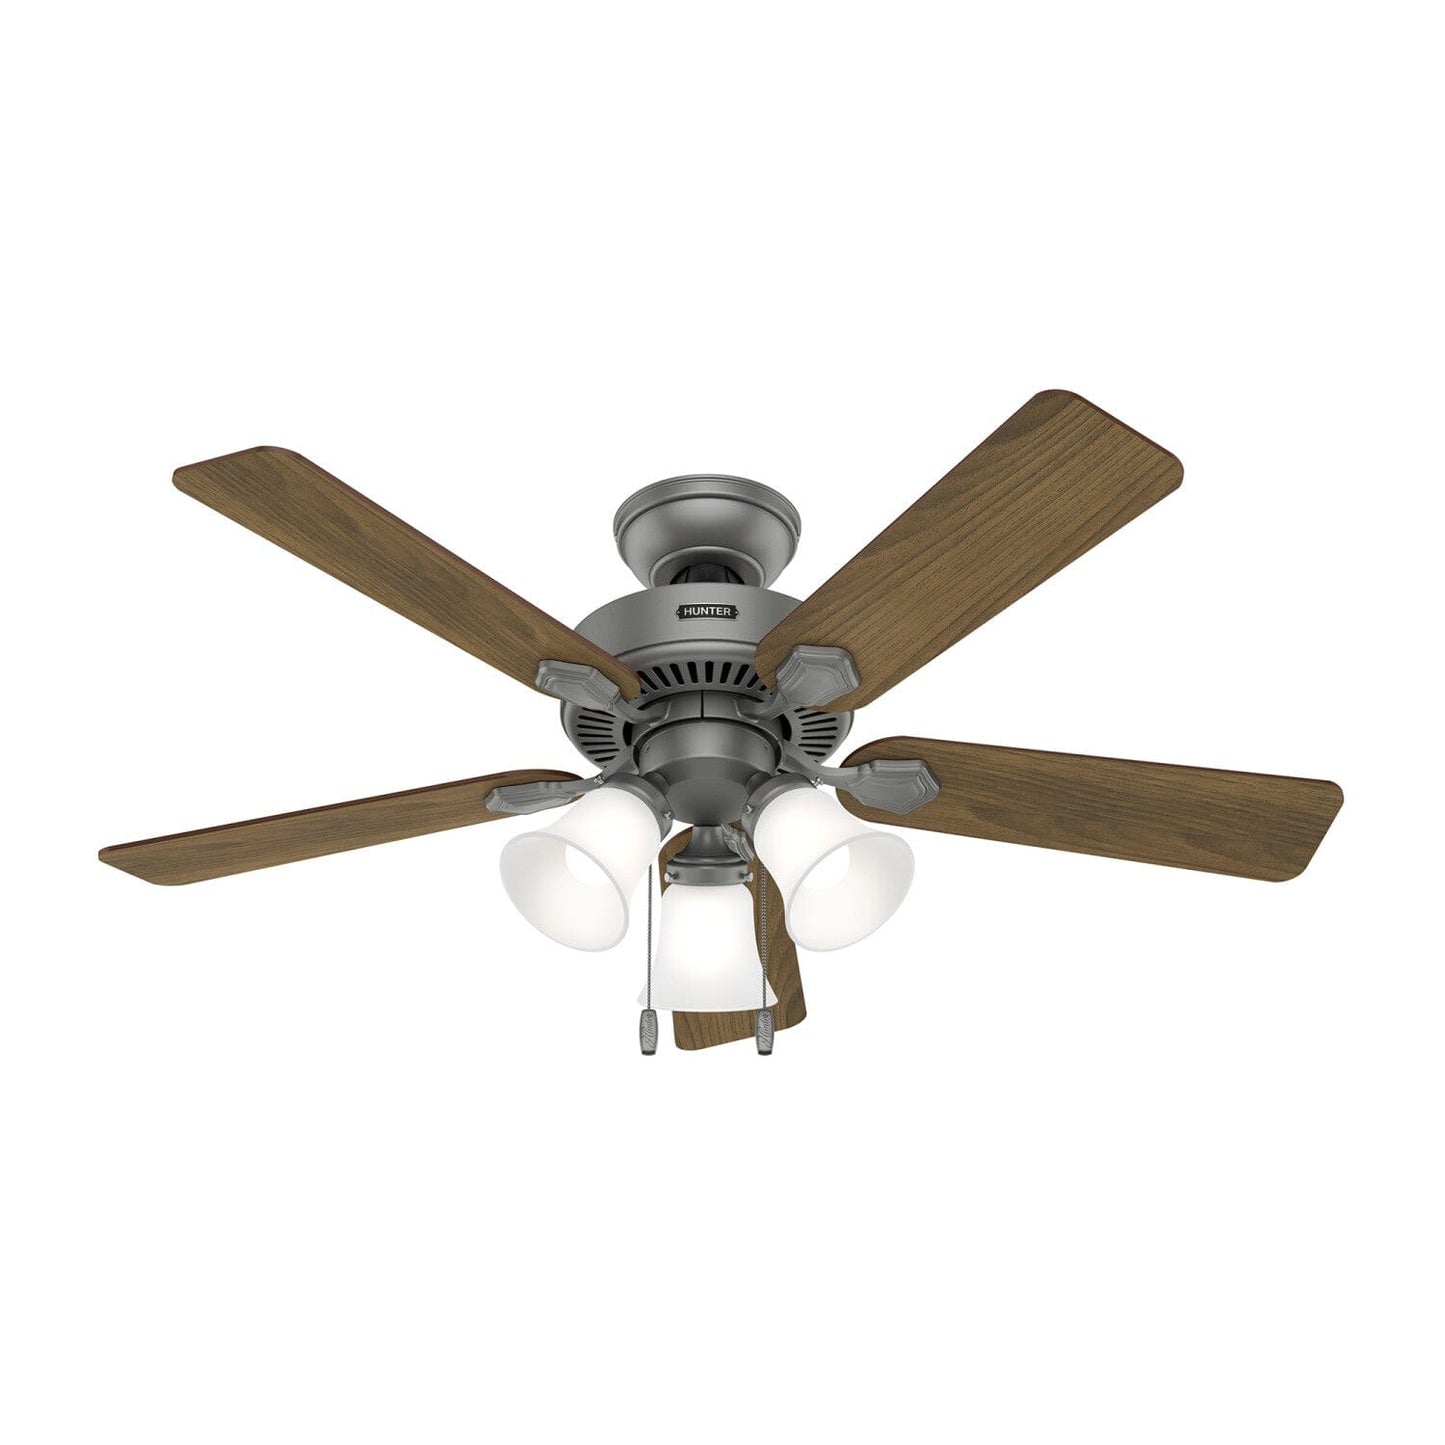 Swanson Energy Star with LED Light 44 inch Ceiling Fans Hunter Matte Silver - Autumn Walnut 